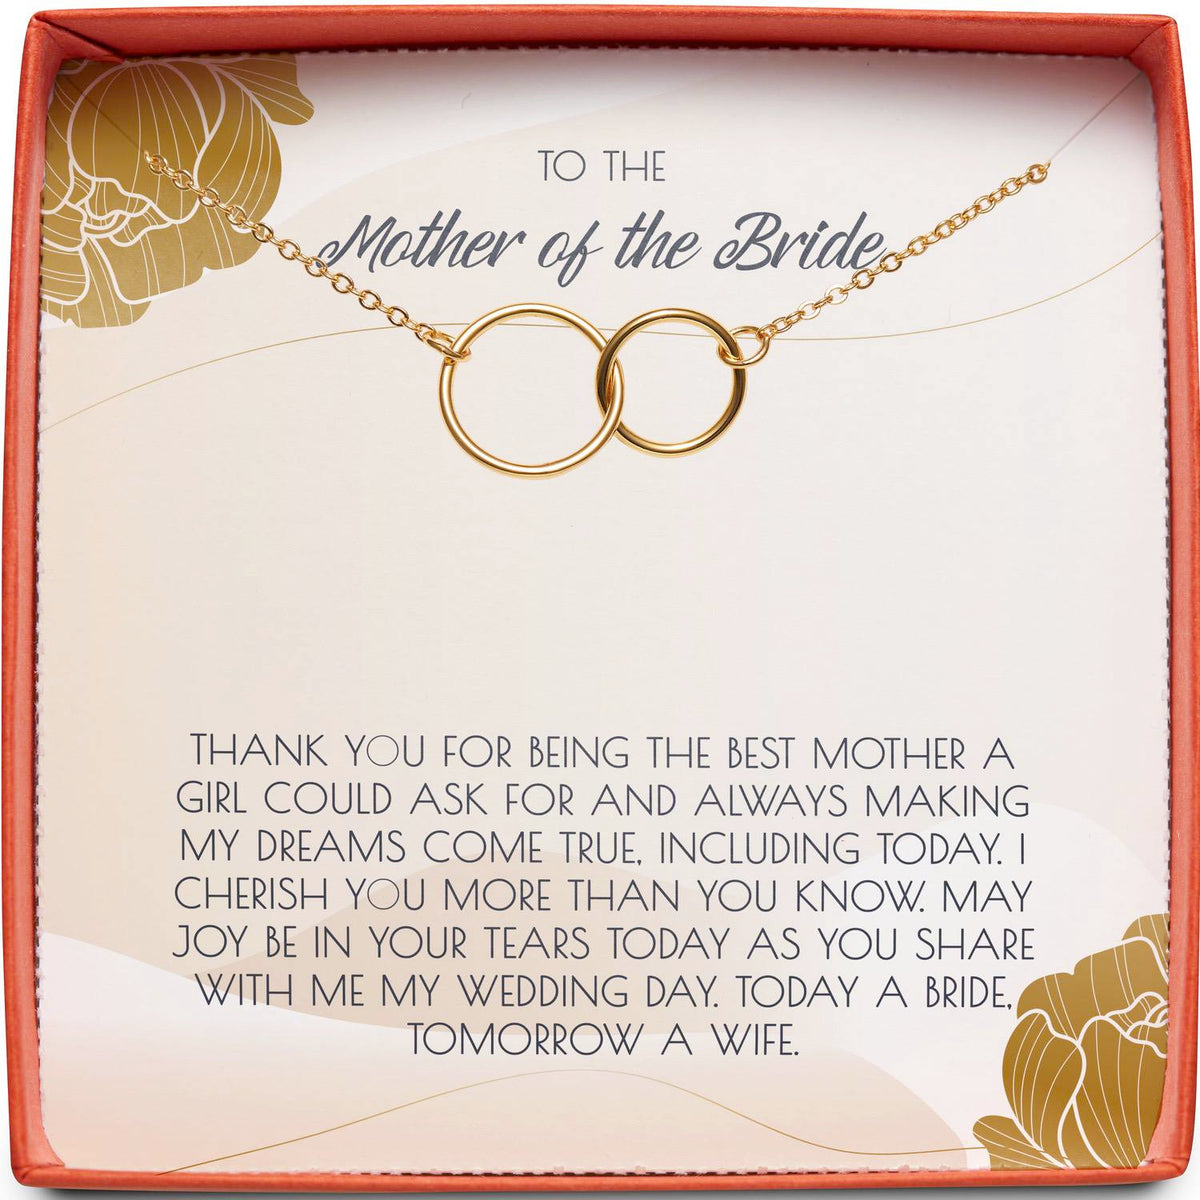 To the Mother of the Bride (From Daughter) | Today a Bride, Tomorrow a Wife | Interlocking Circles